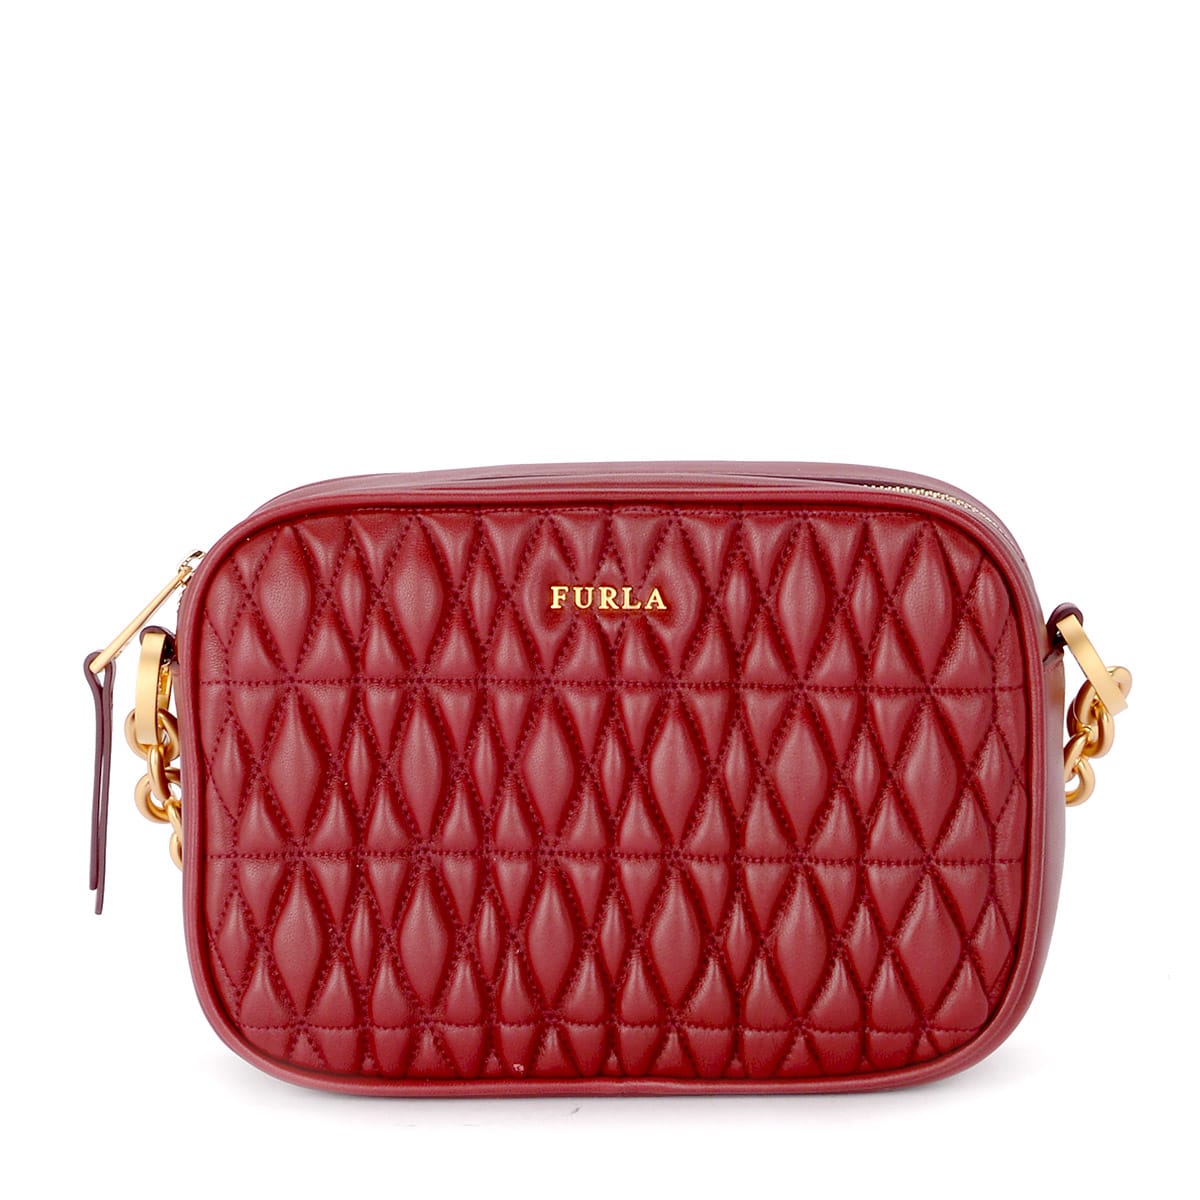 Furla Furla Cometa Red Cherry Quilted Leather Shoulder Bag With Chain ...